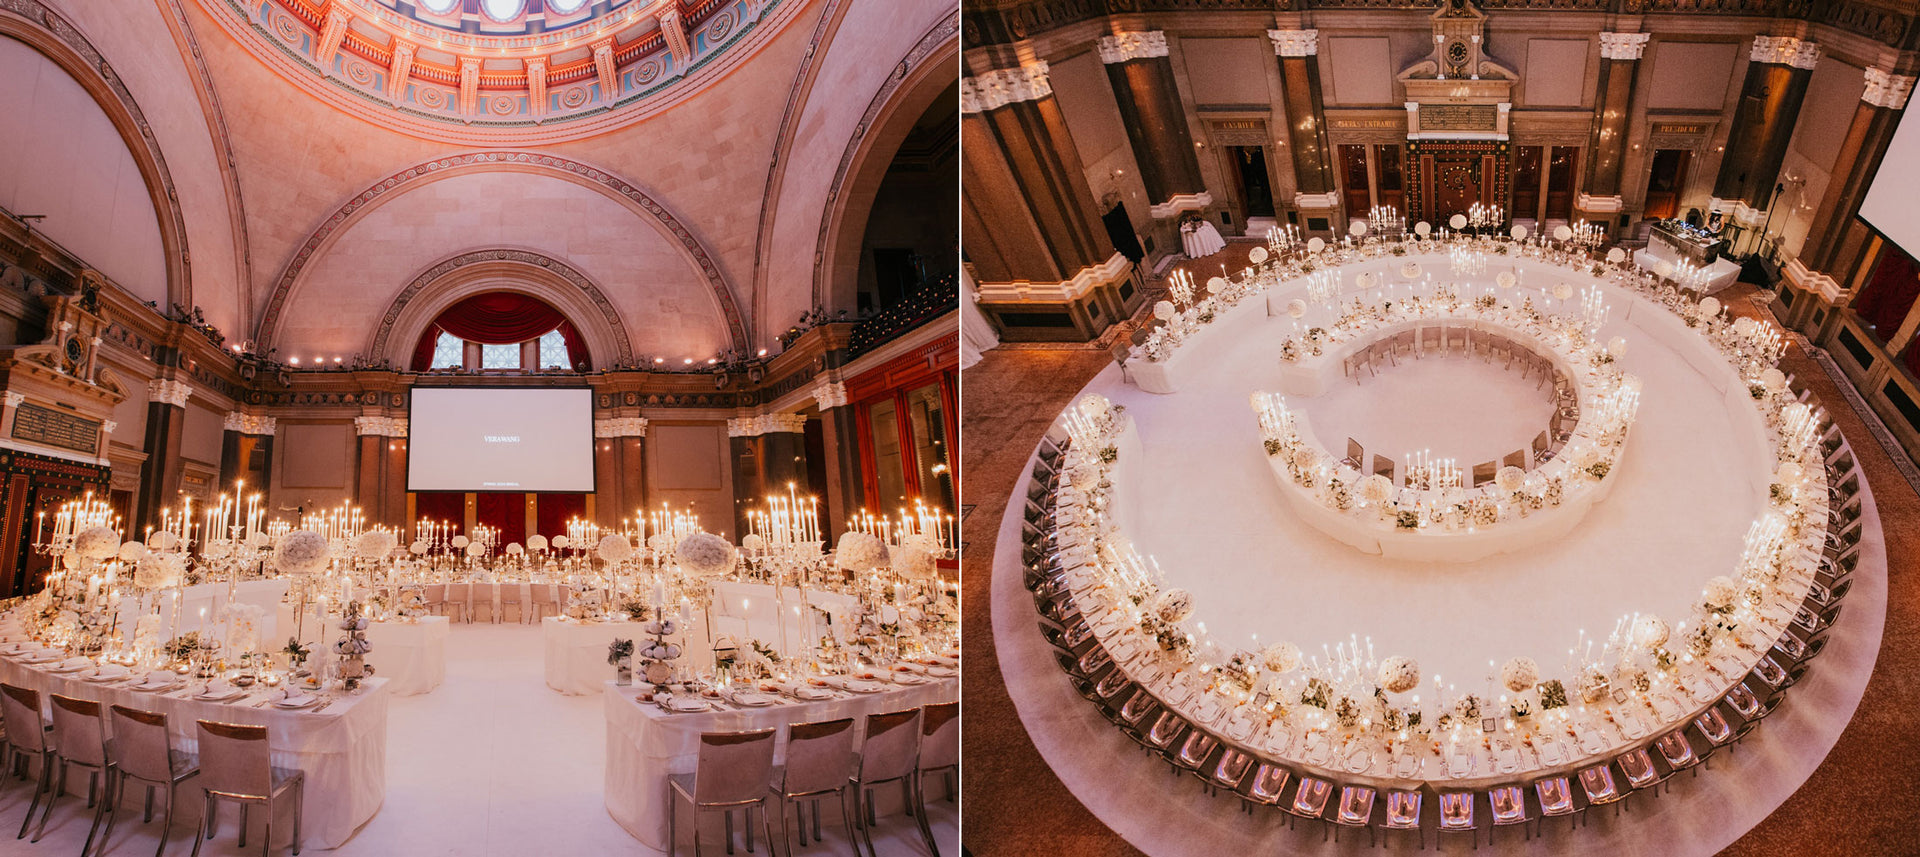 A circular event space in an elegant ballroom featuring a dome roof.